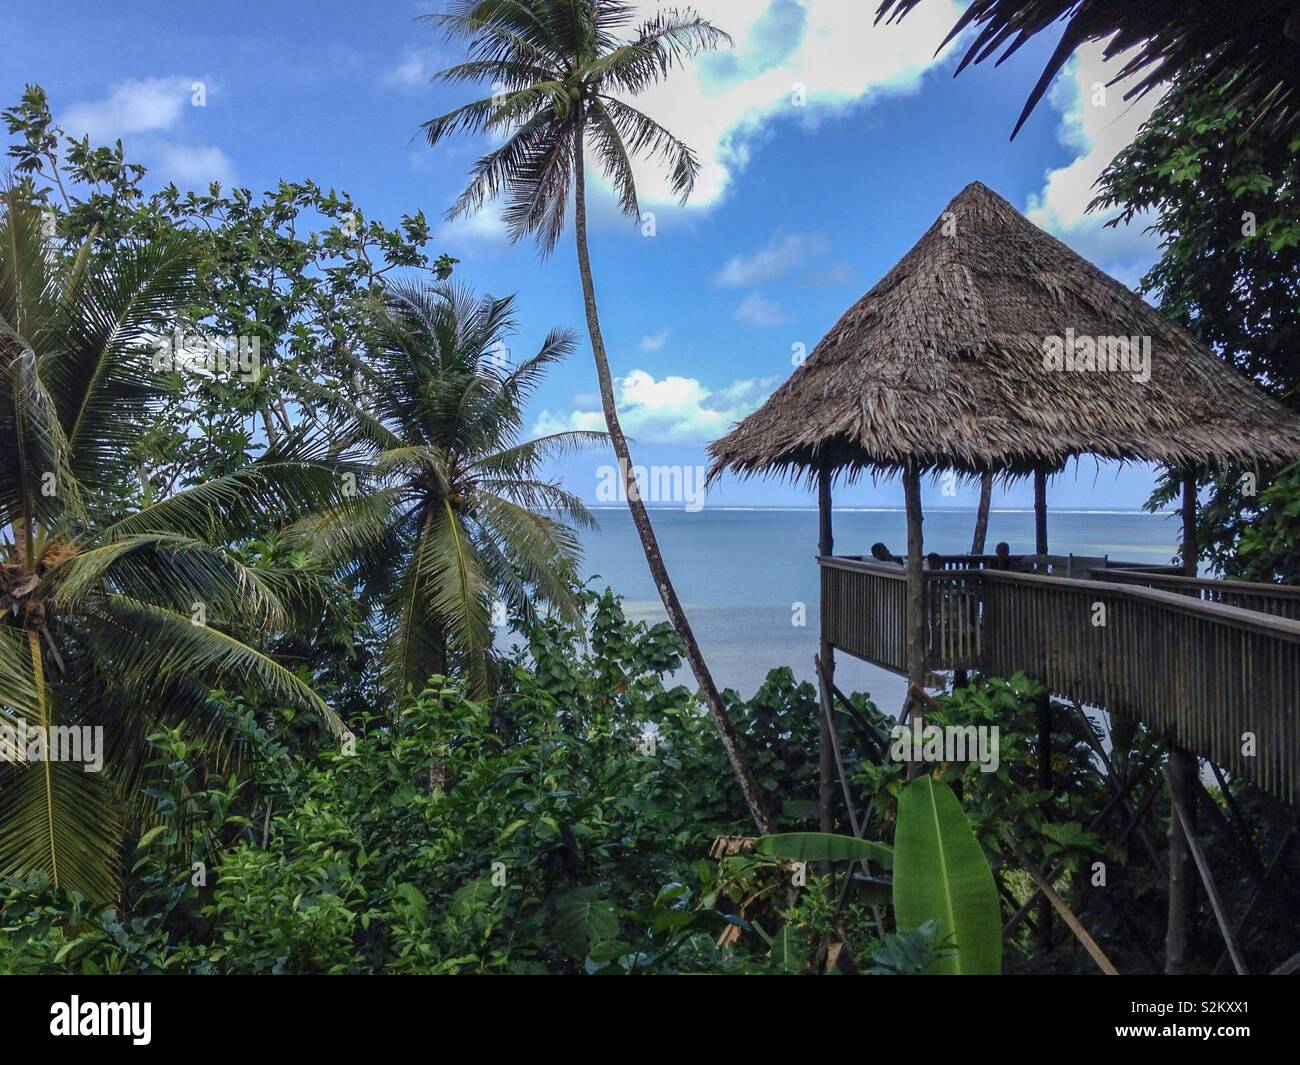 Thatch Hut Pohnpei, Federated States of Micronesia Stock Photo